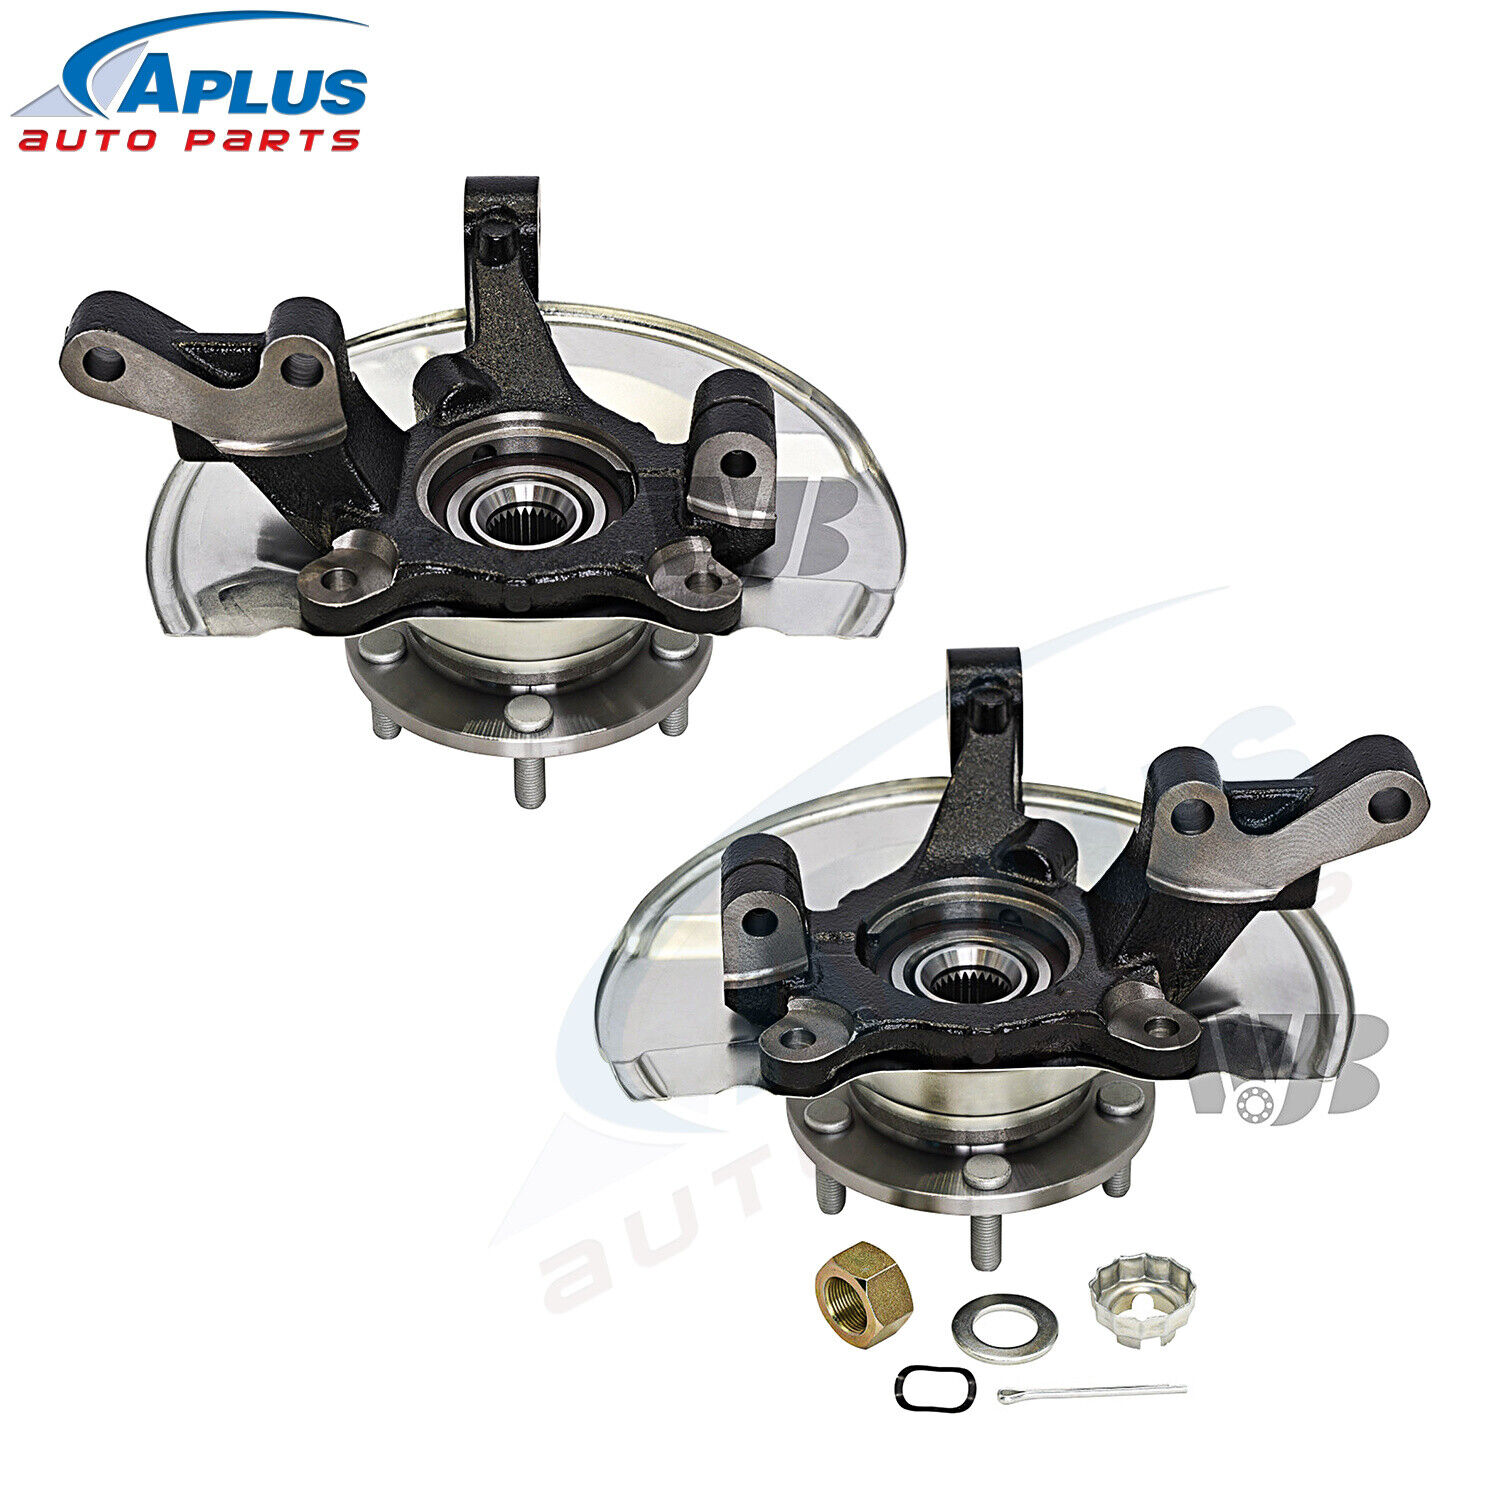 2 Front Knuckle & Wheel Bearing Hub For 07-12 Dodge Caliber Jeep Compass Patriot